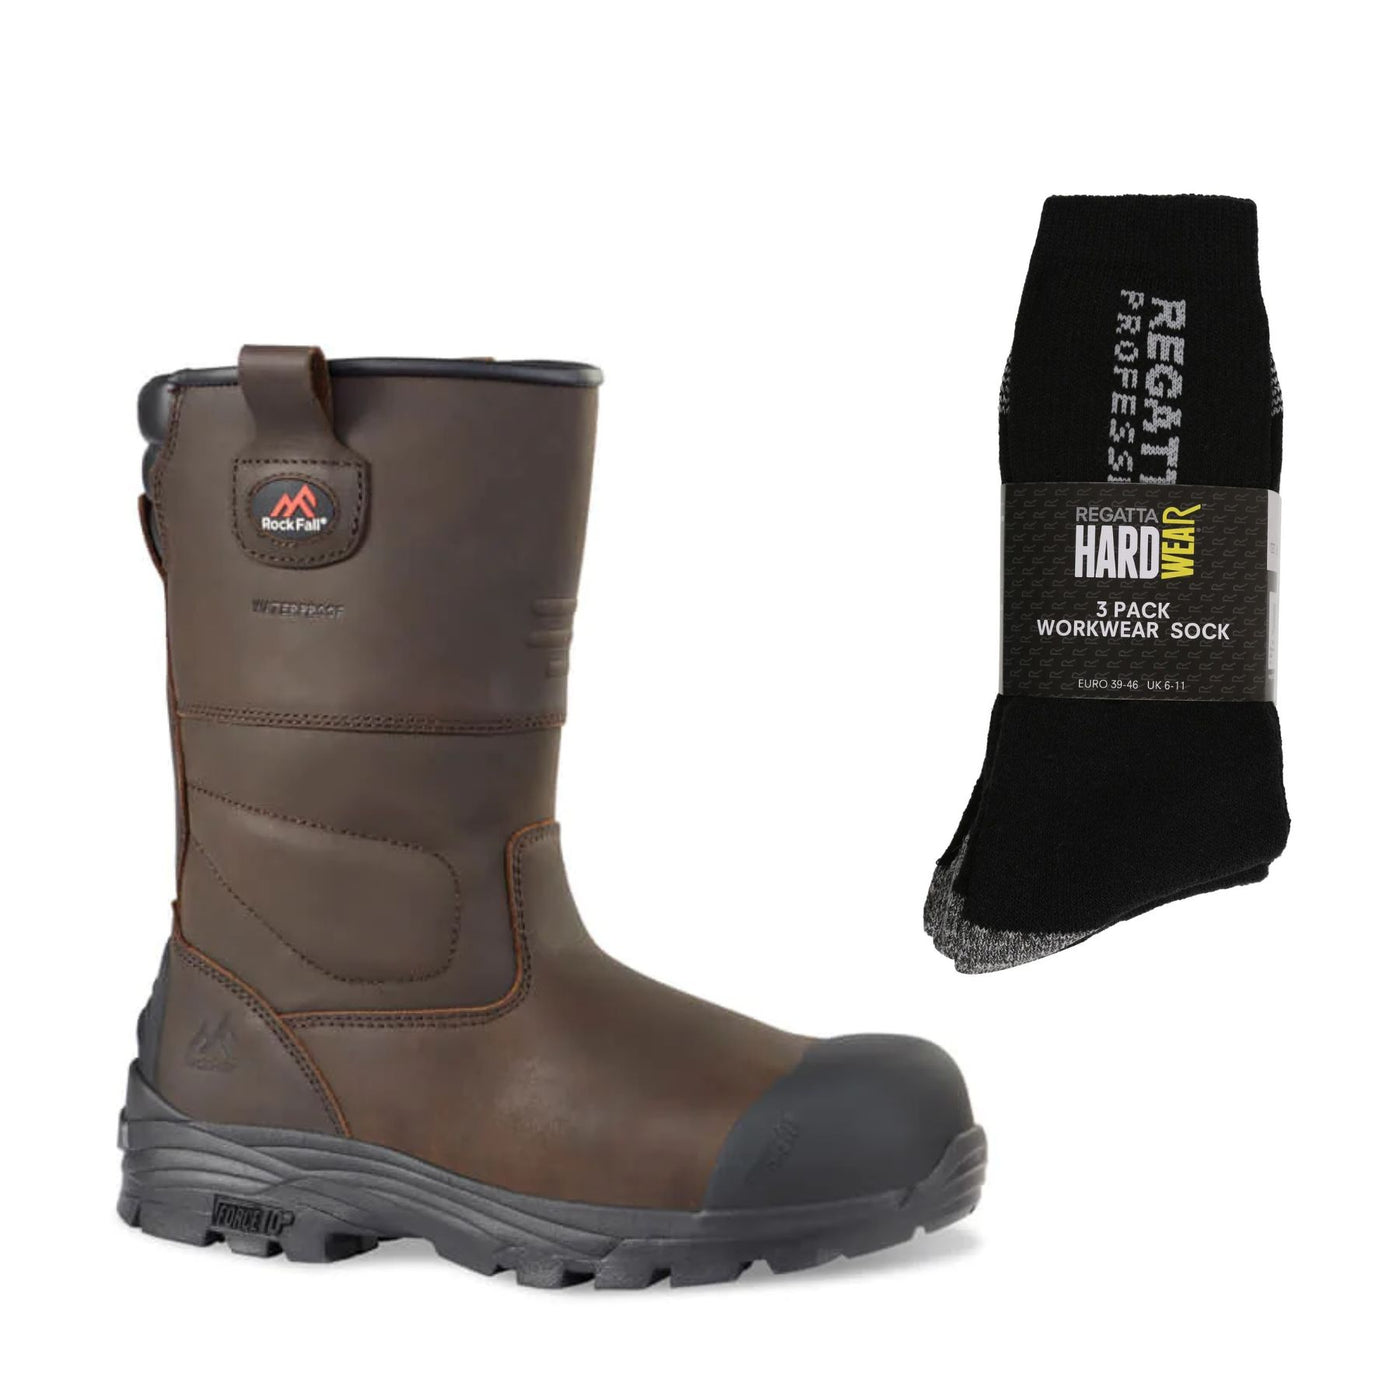 RockFall Texas Boots Special Offer Pack - RF70 Rigger Boots + 3 Pairs Work Socks